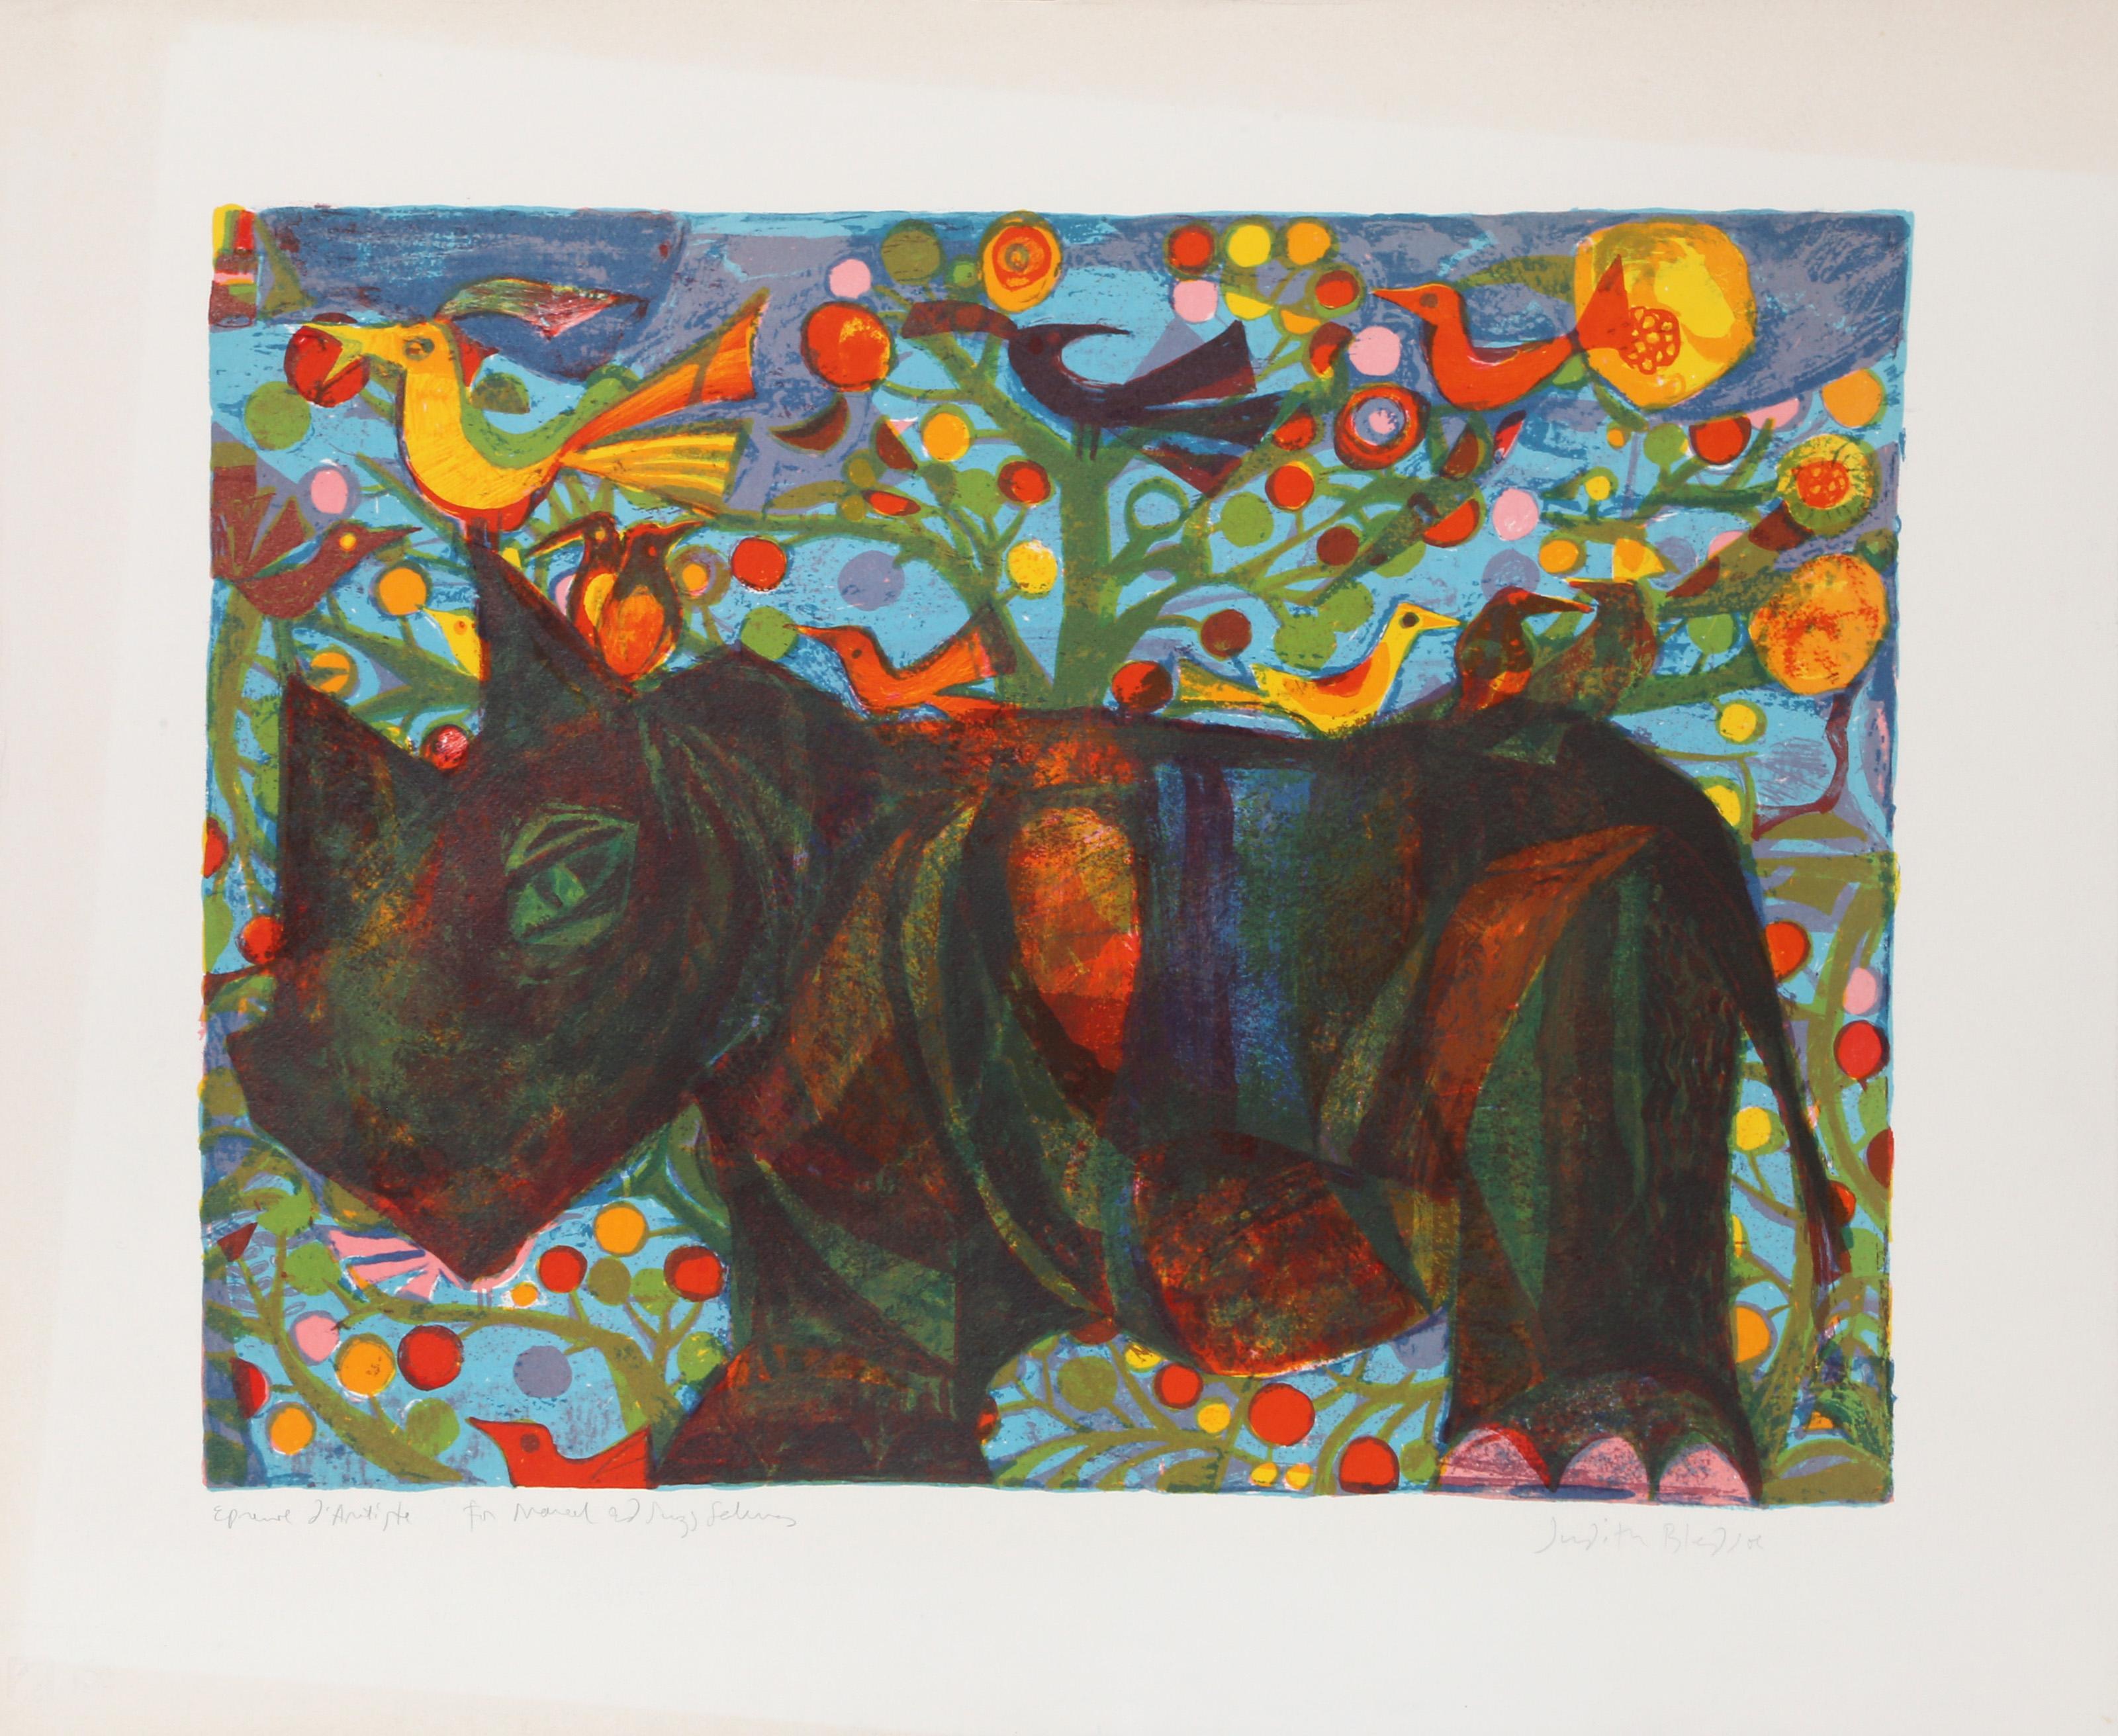 Judith Bledsoe, American (1938 - 2013) -  Black Rhino. Year: circa 1970, Medium: Lithograph, signed and dedicated in pencil, Edition: EA, Image Size: 16 x 21 inches, Size: 21.5 x 26 in. (54.61 x 66.04 cm), Description: Rendered in profile, Judith